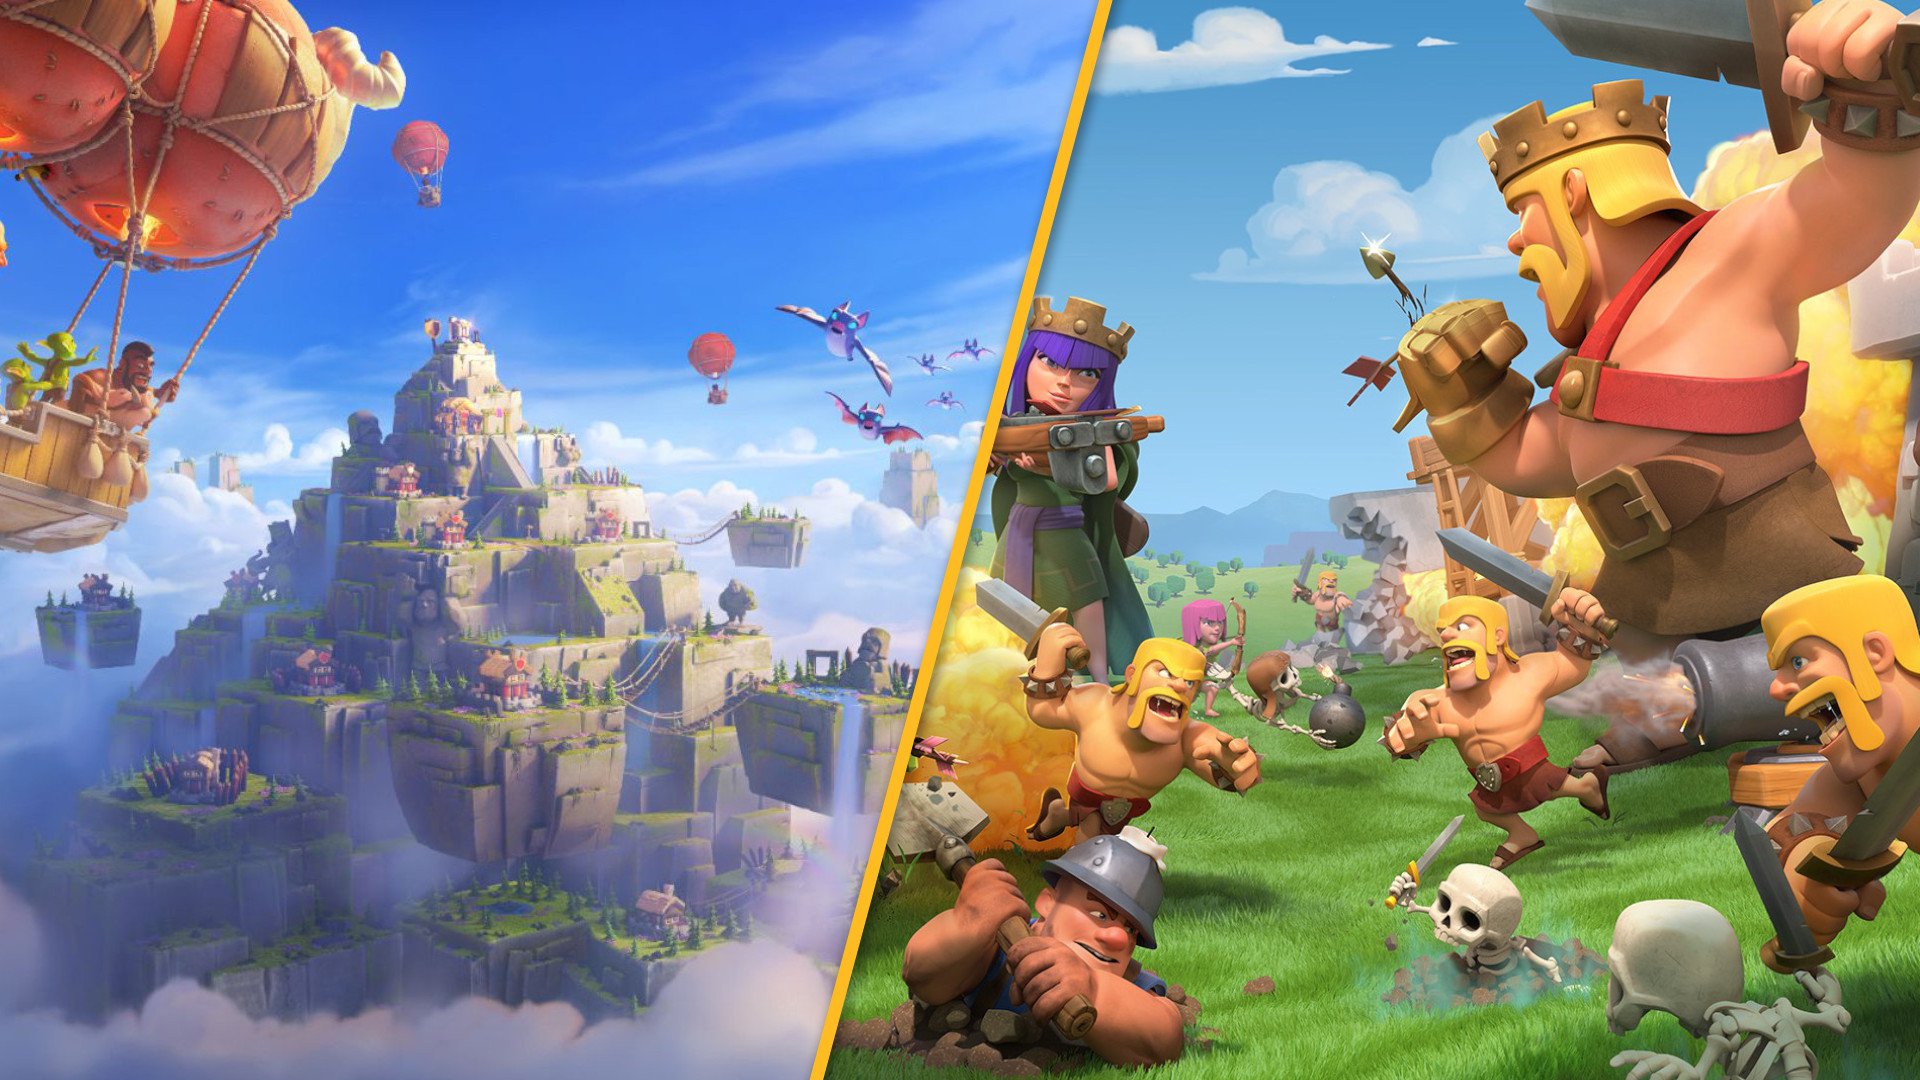 Team up with your friends in the biggest Clash of Clans update ever